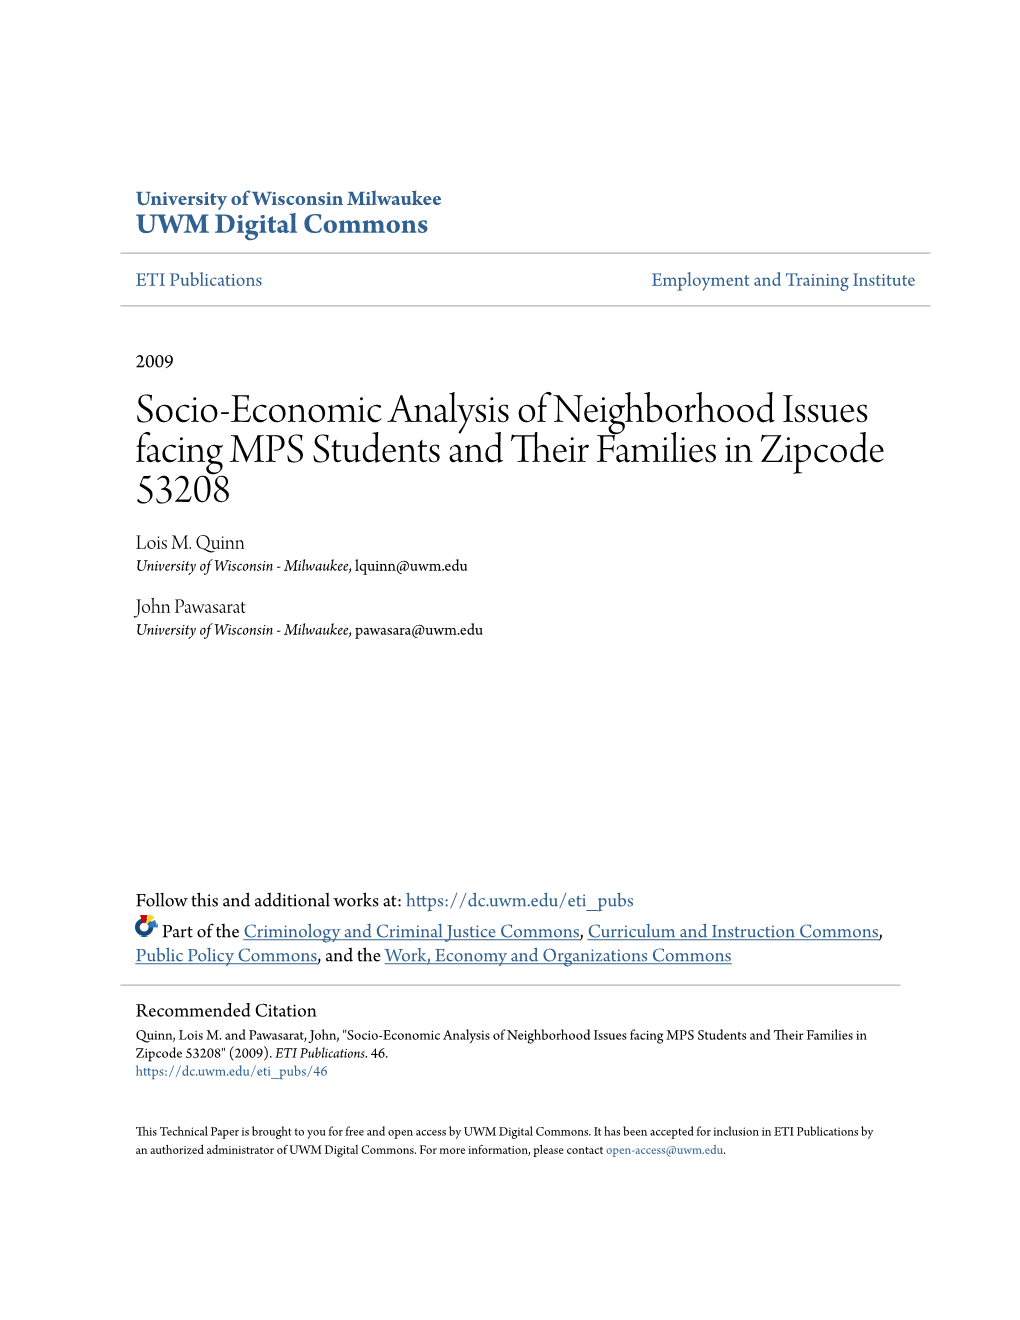 Socio-Economic Analysis of Neighborhood Issues Facing MPS Students and Their Af Milies in Zipcode 53208 Lois M